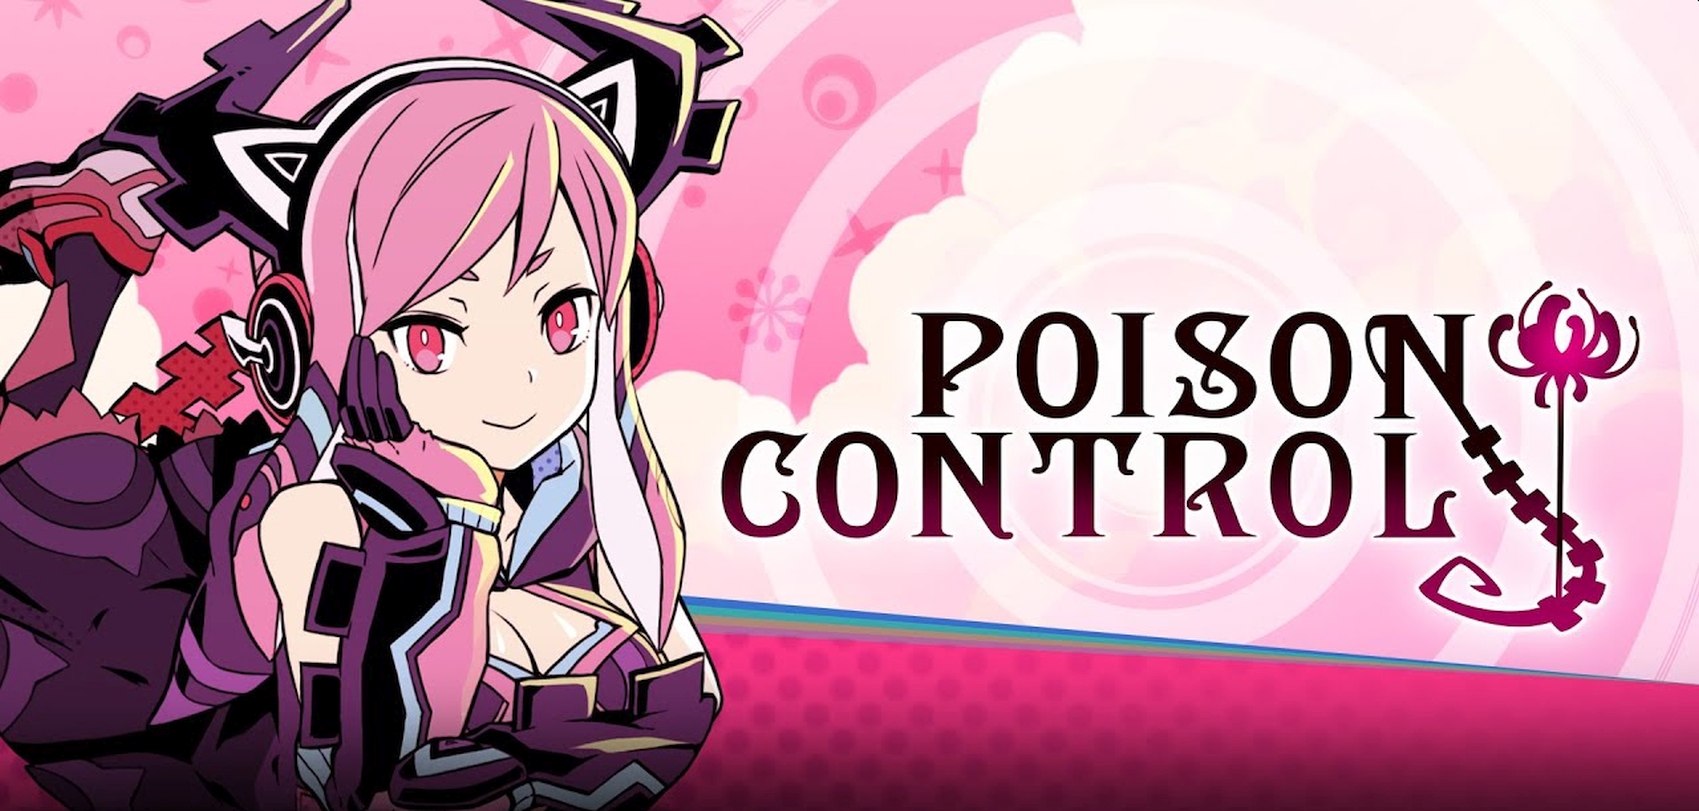 NIS America Announces Poison Control For PlayStation 4 And Nintendo Switch In April 2021